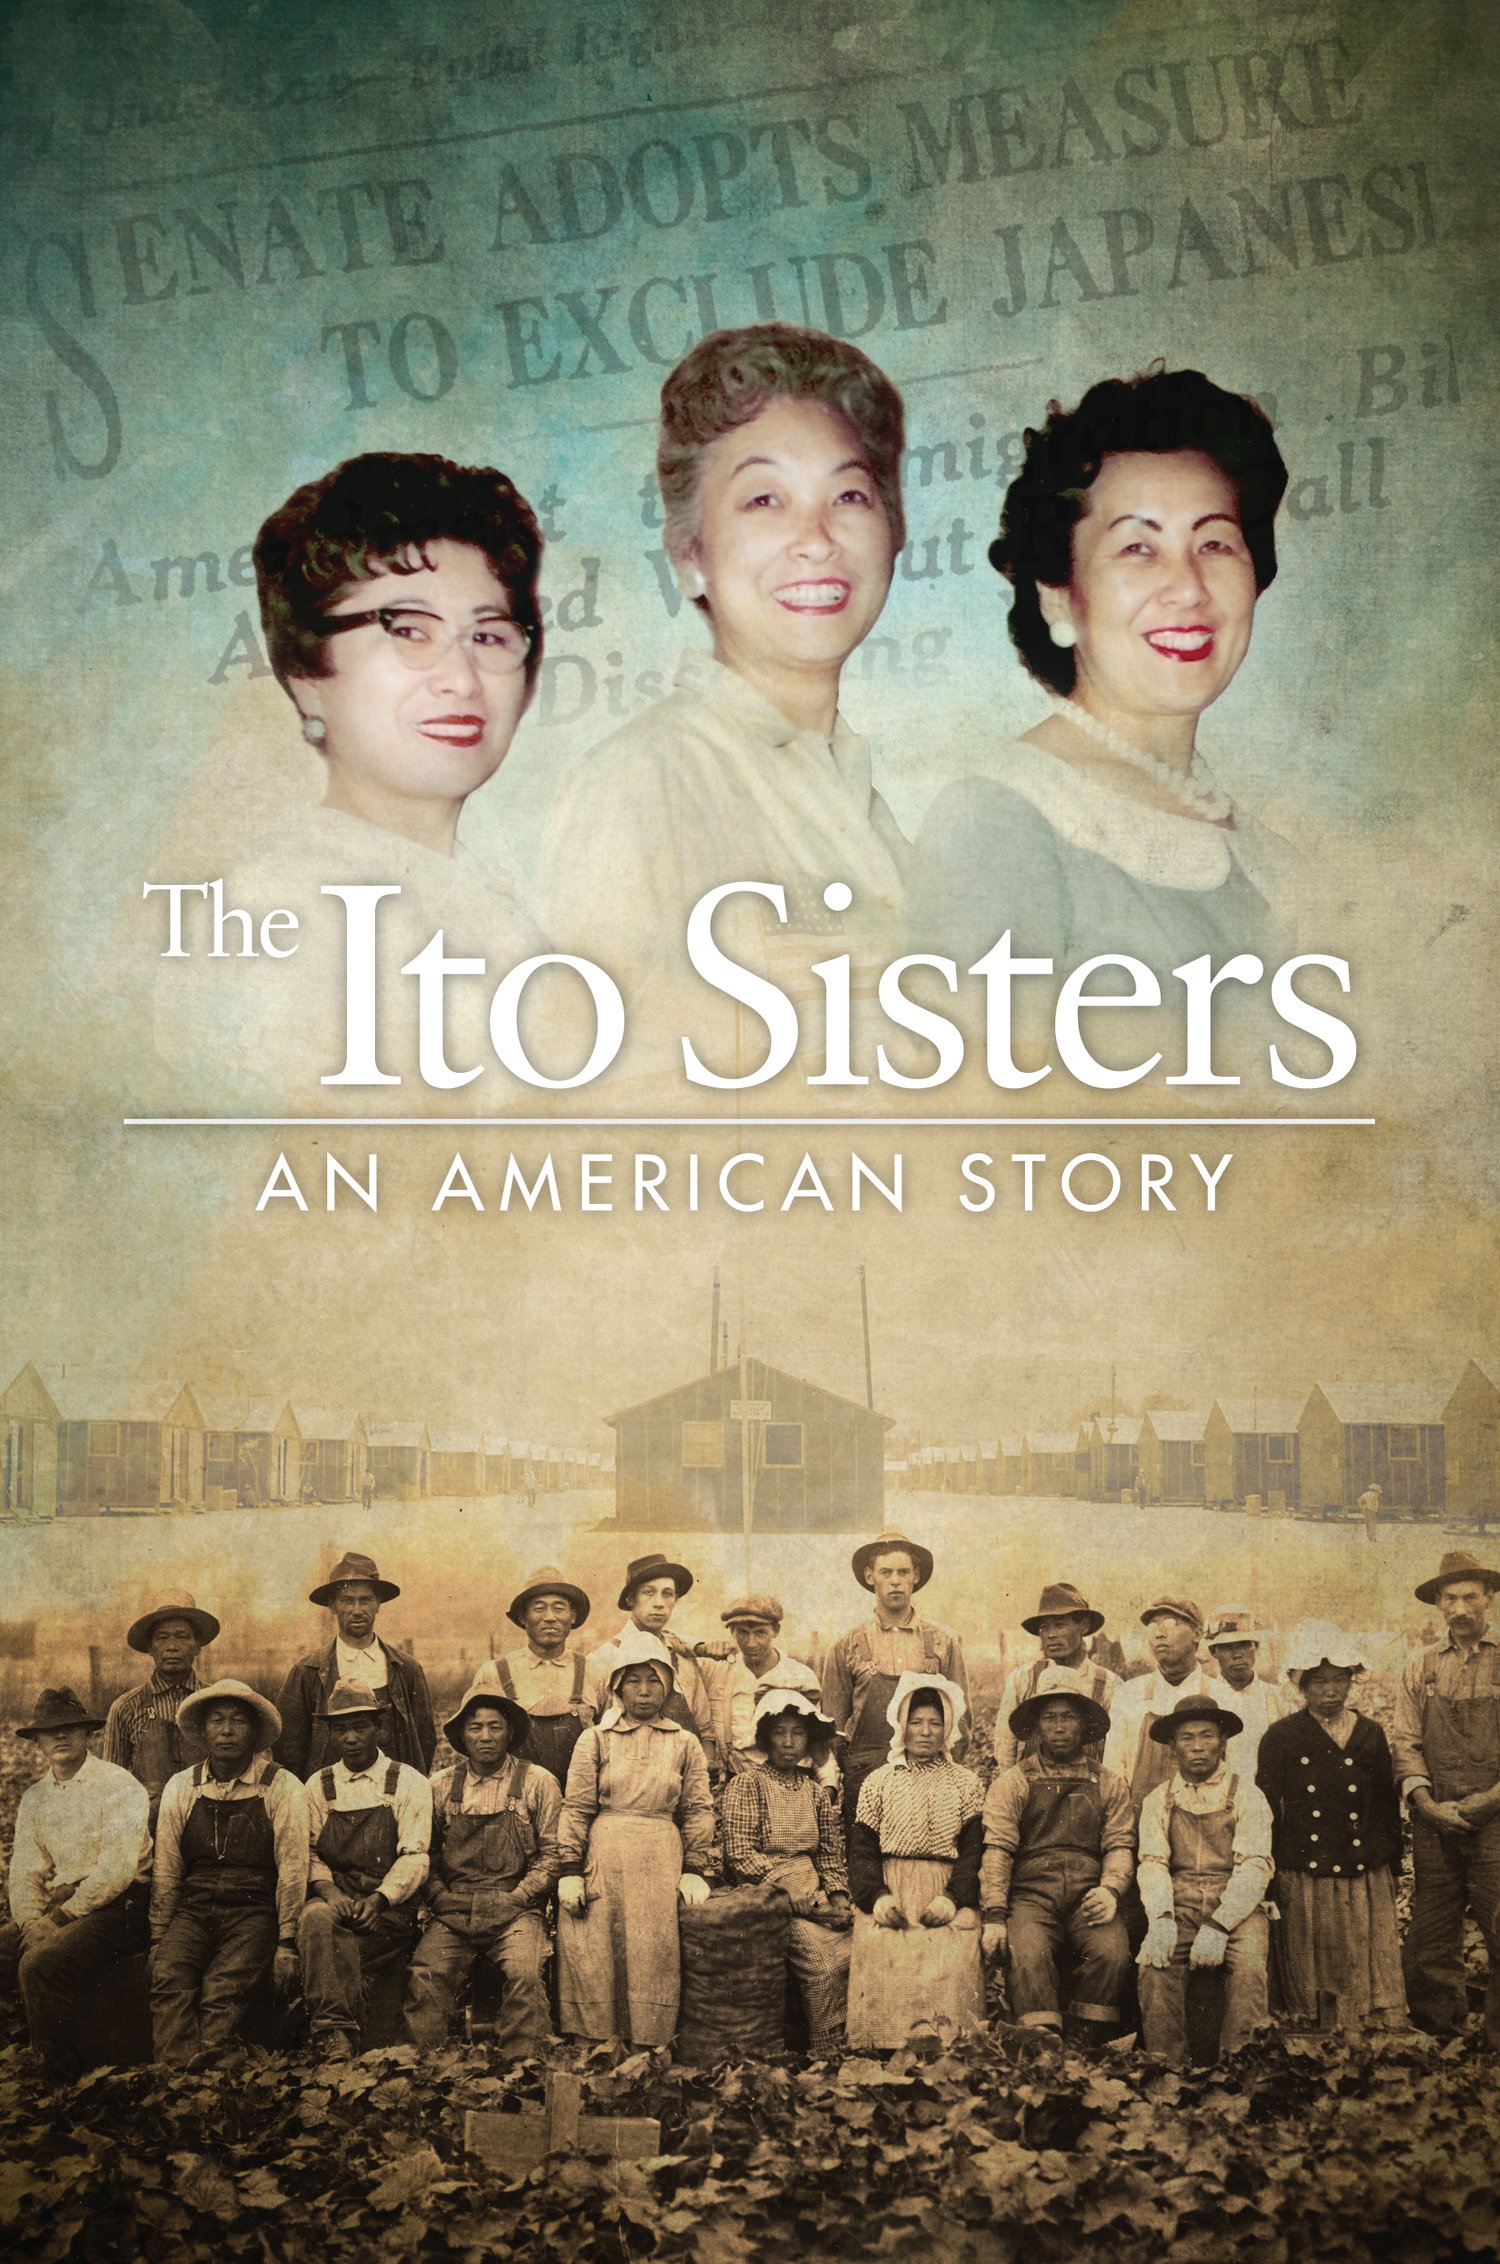 The Ito Sisters: An American Story